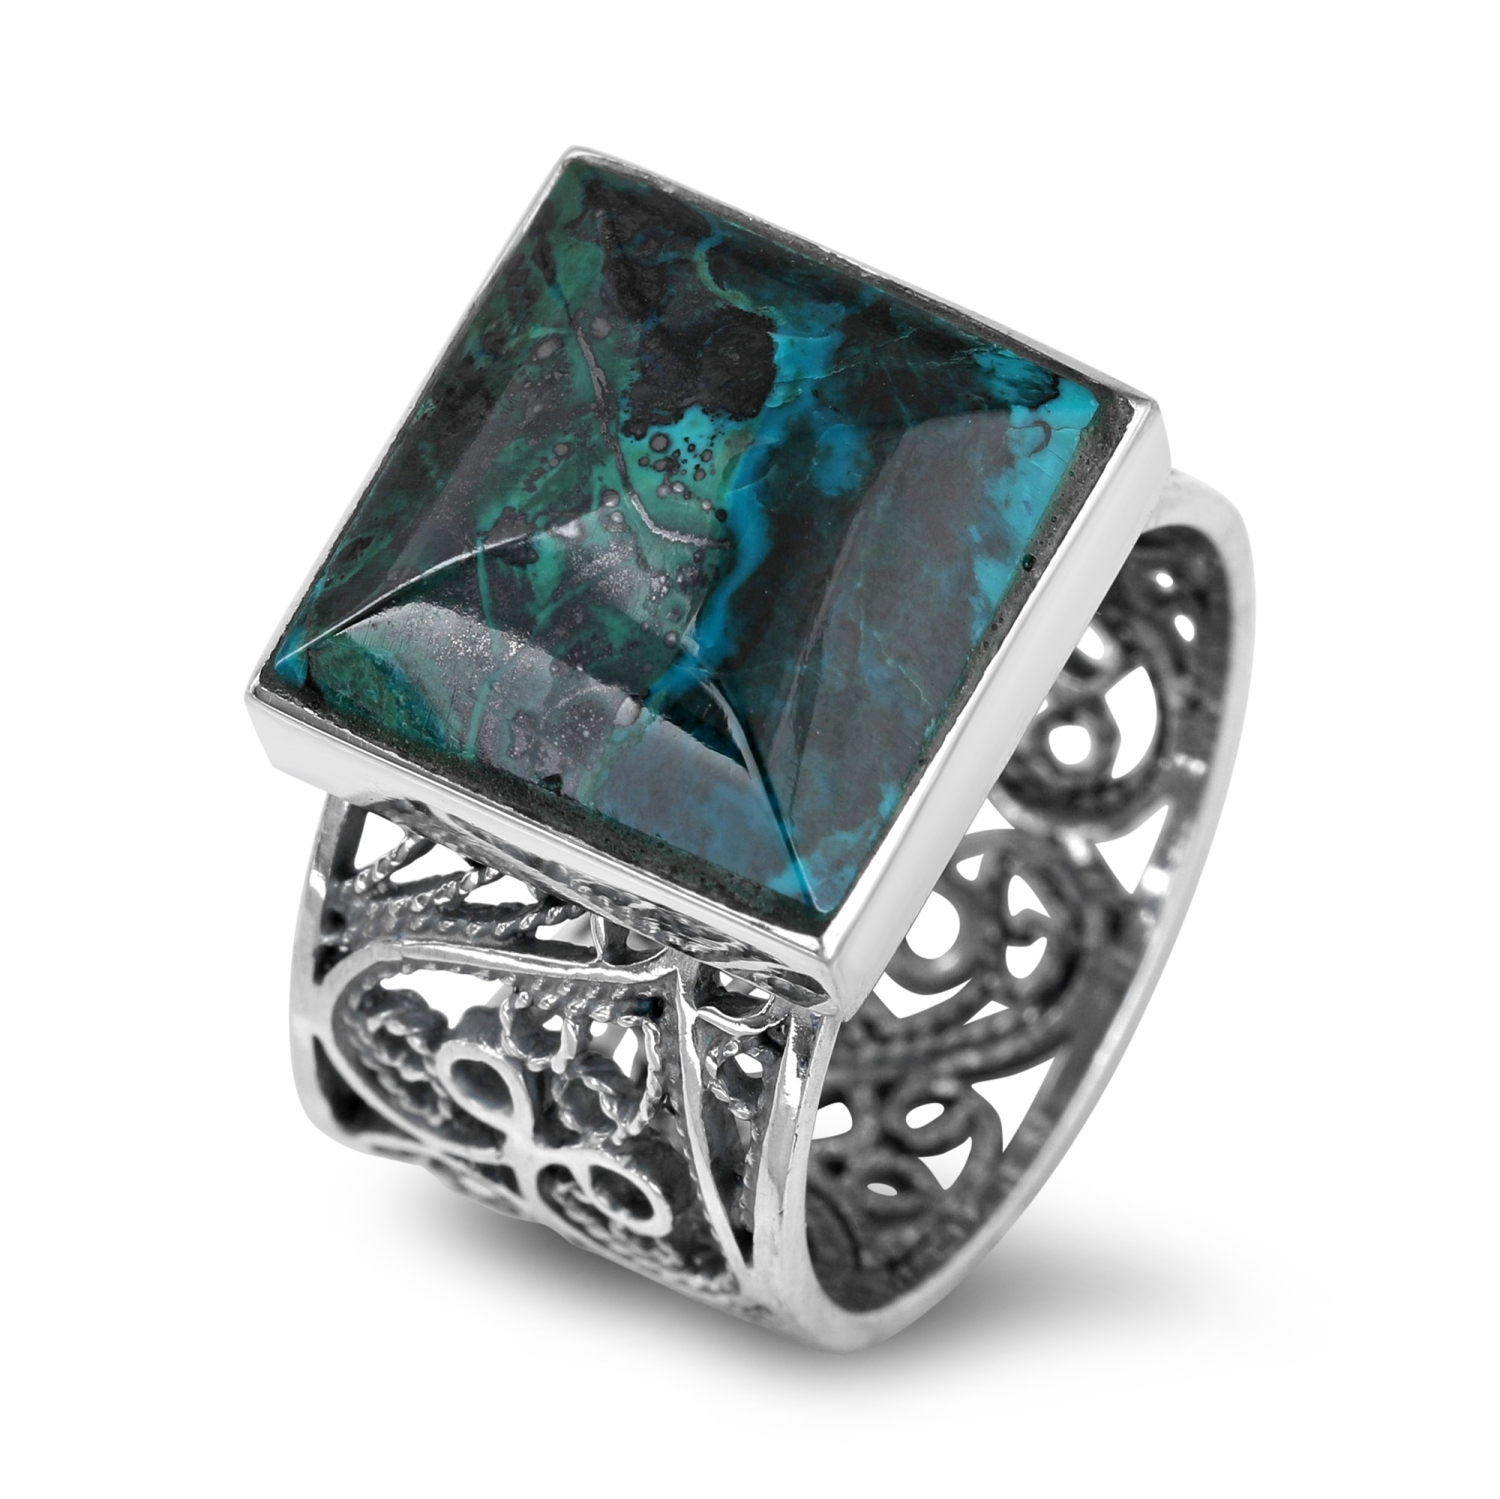 Sterling Silver Filigree Ring with Square Eilat Stone - 2